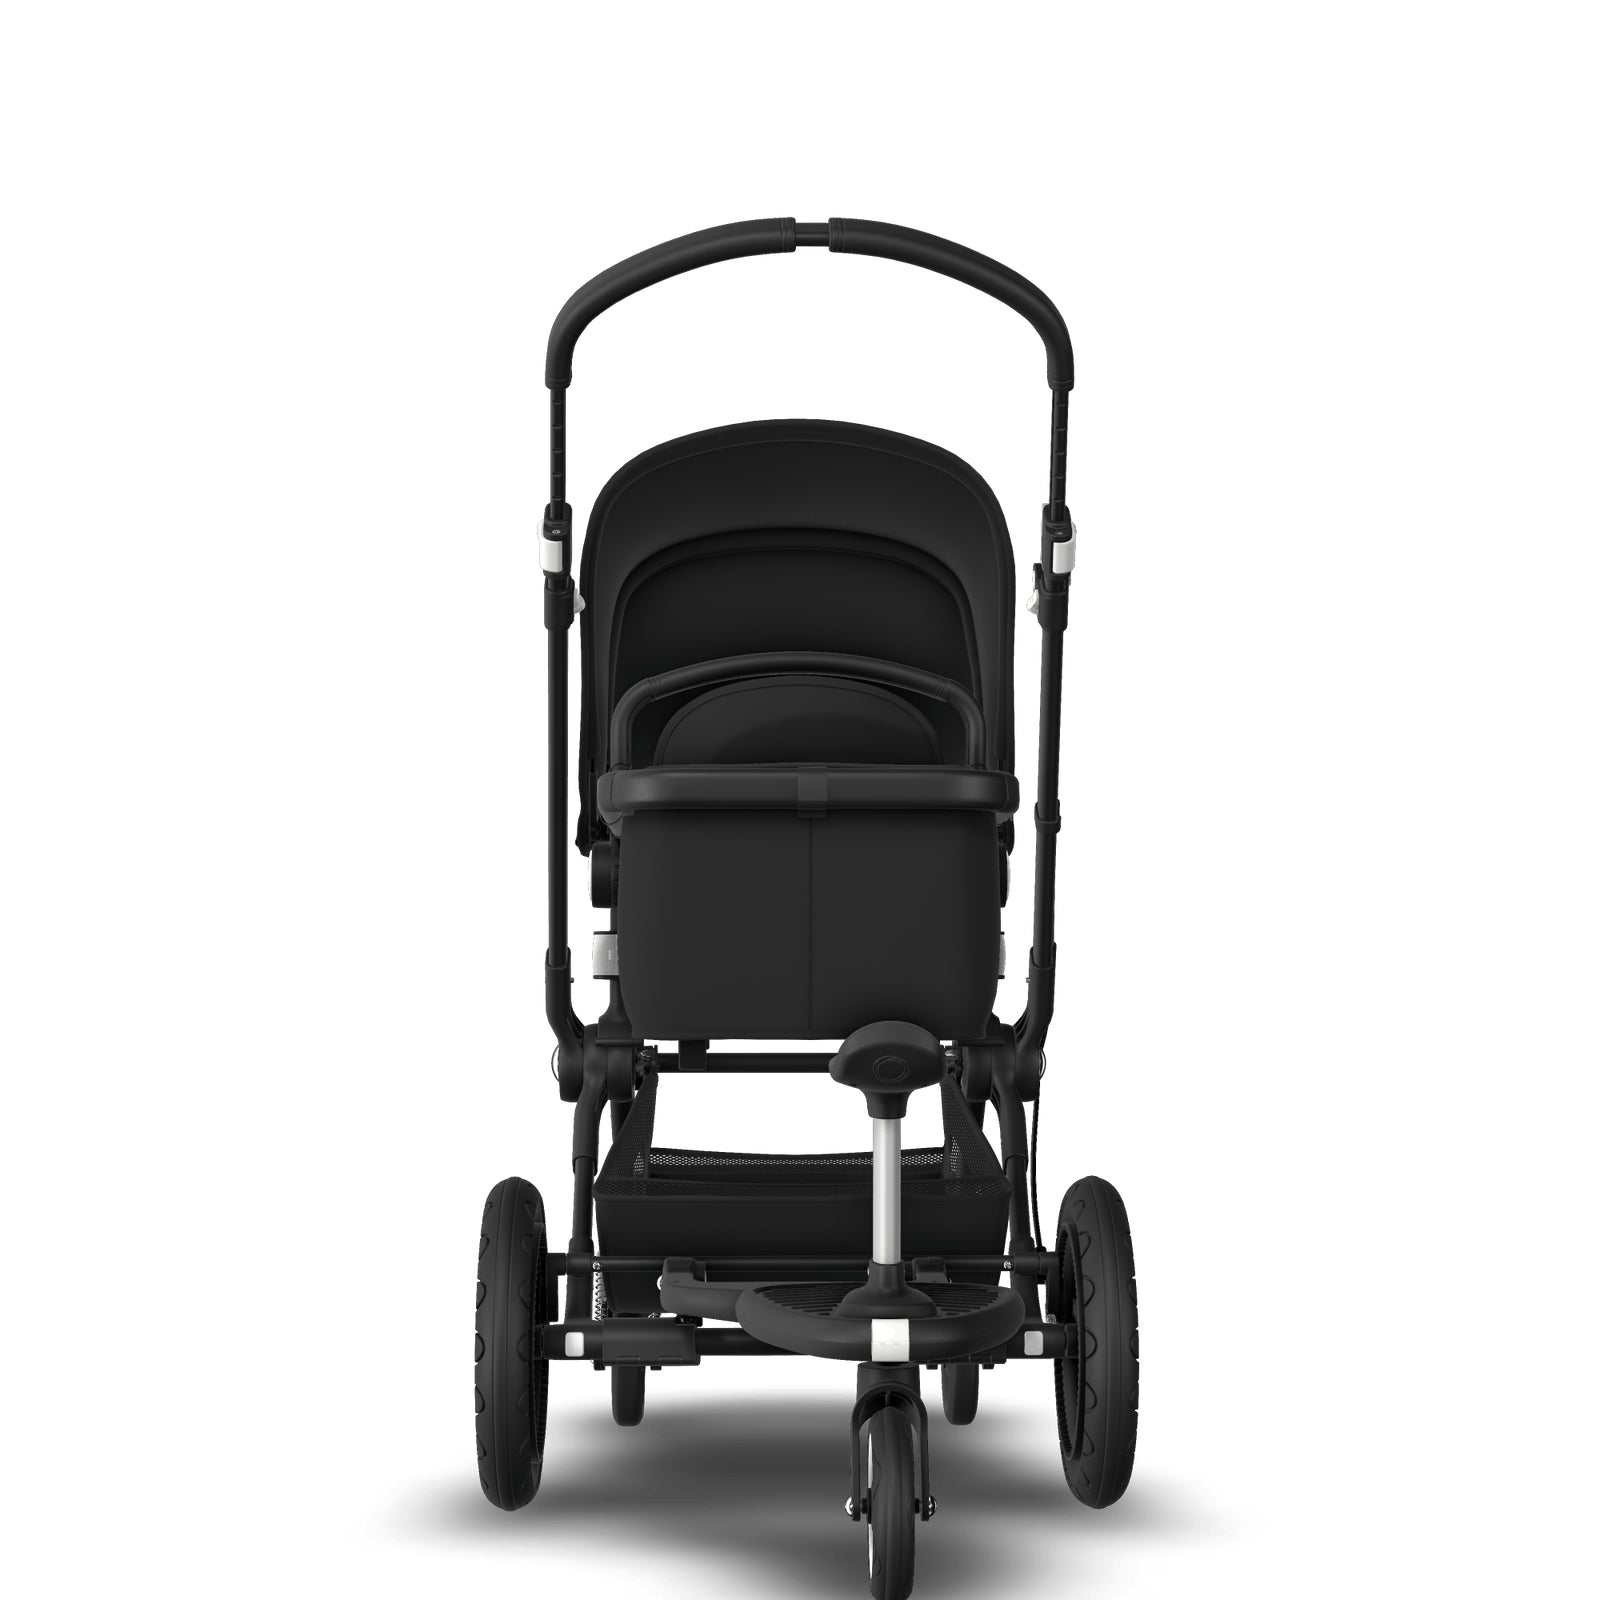 Bugaboo Cameleon 3 Plus Sit and Stand Pushchair - Black + Black